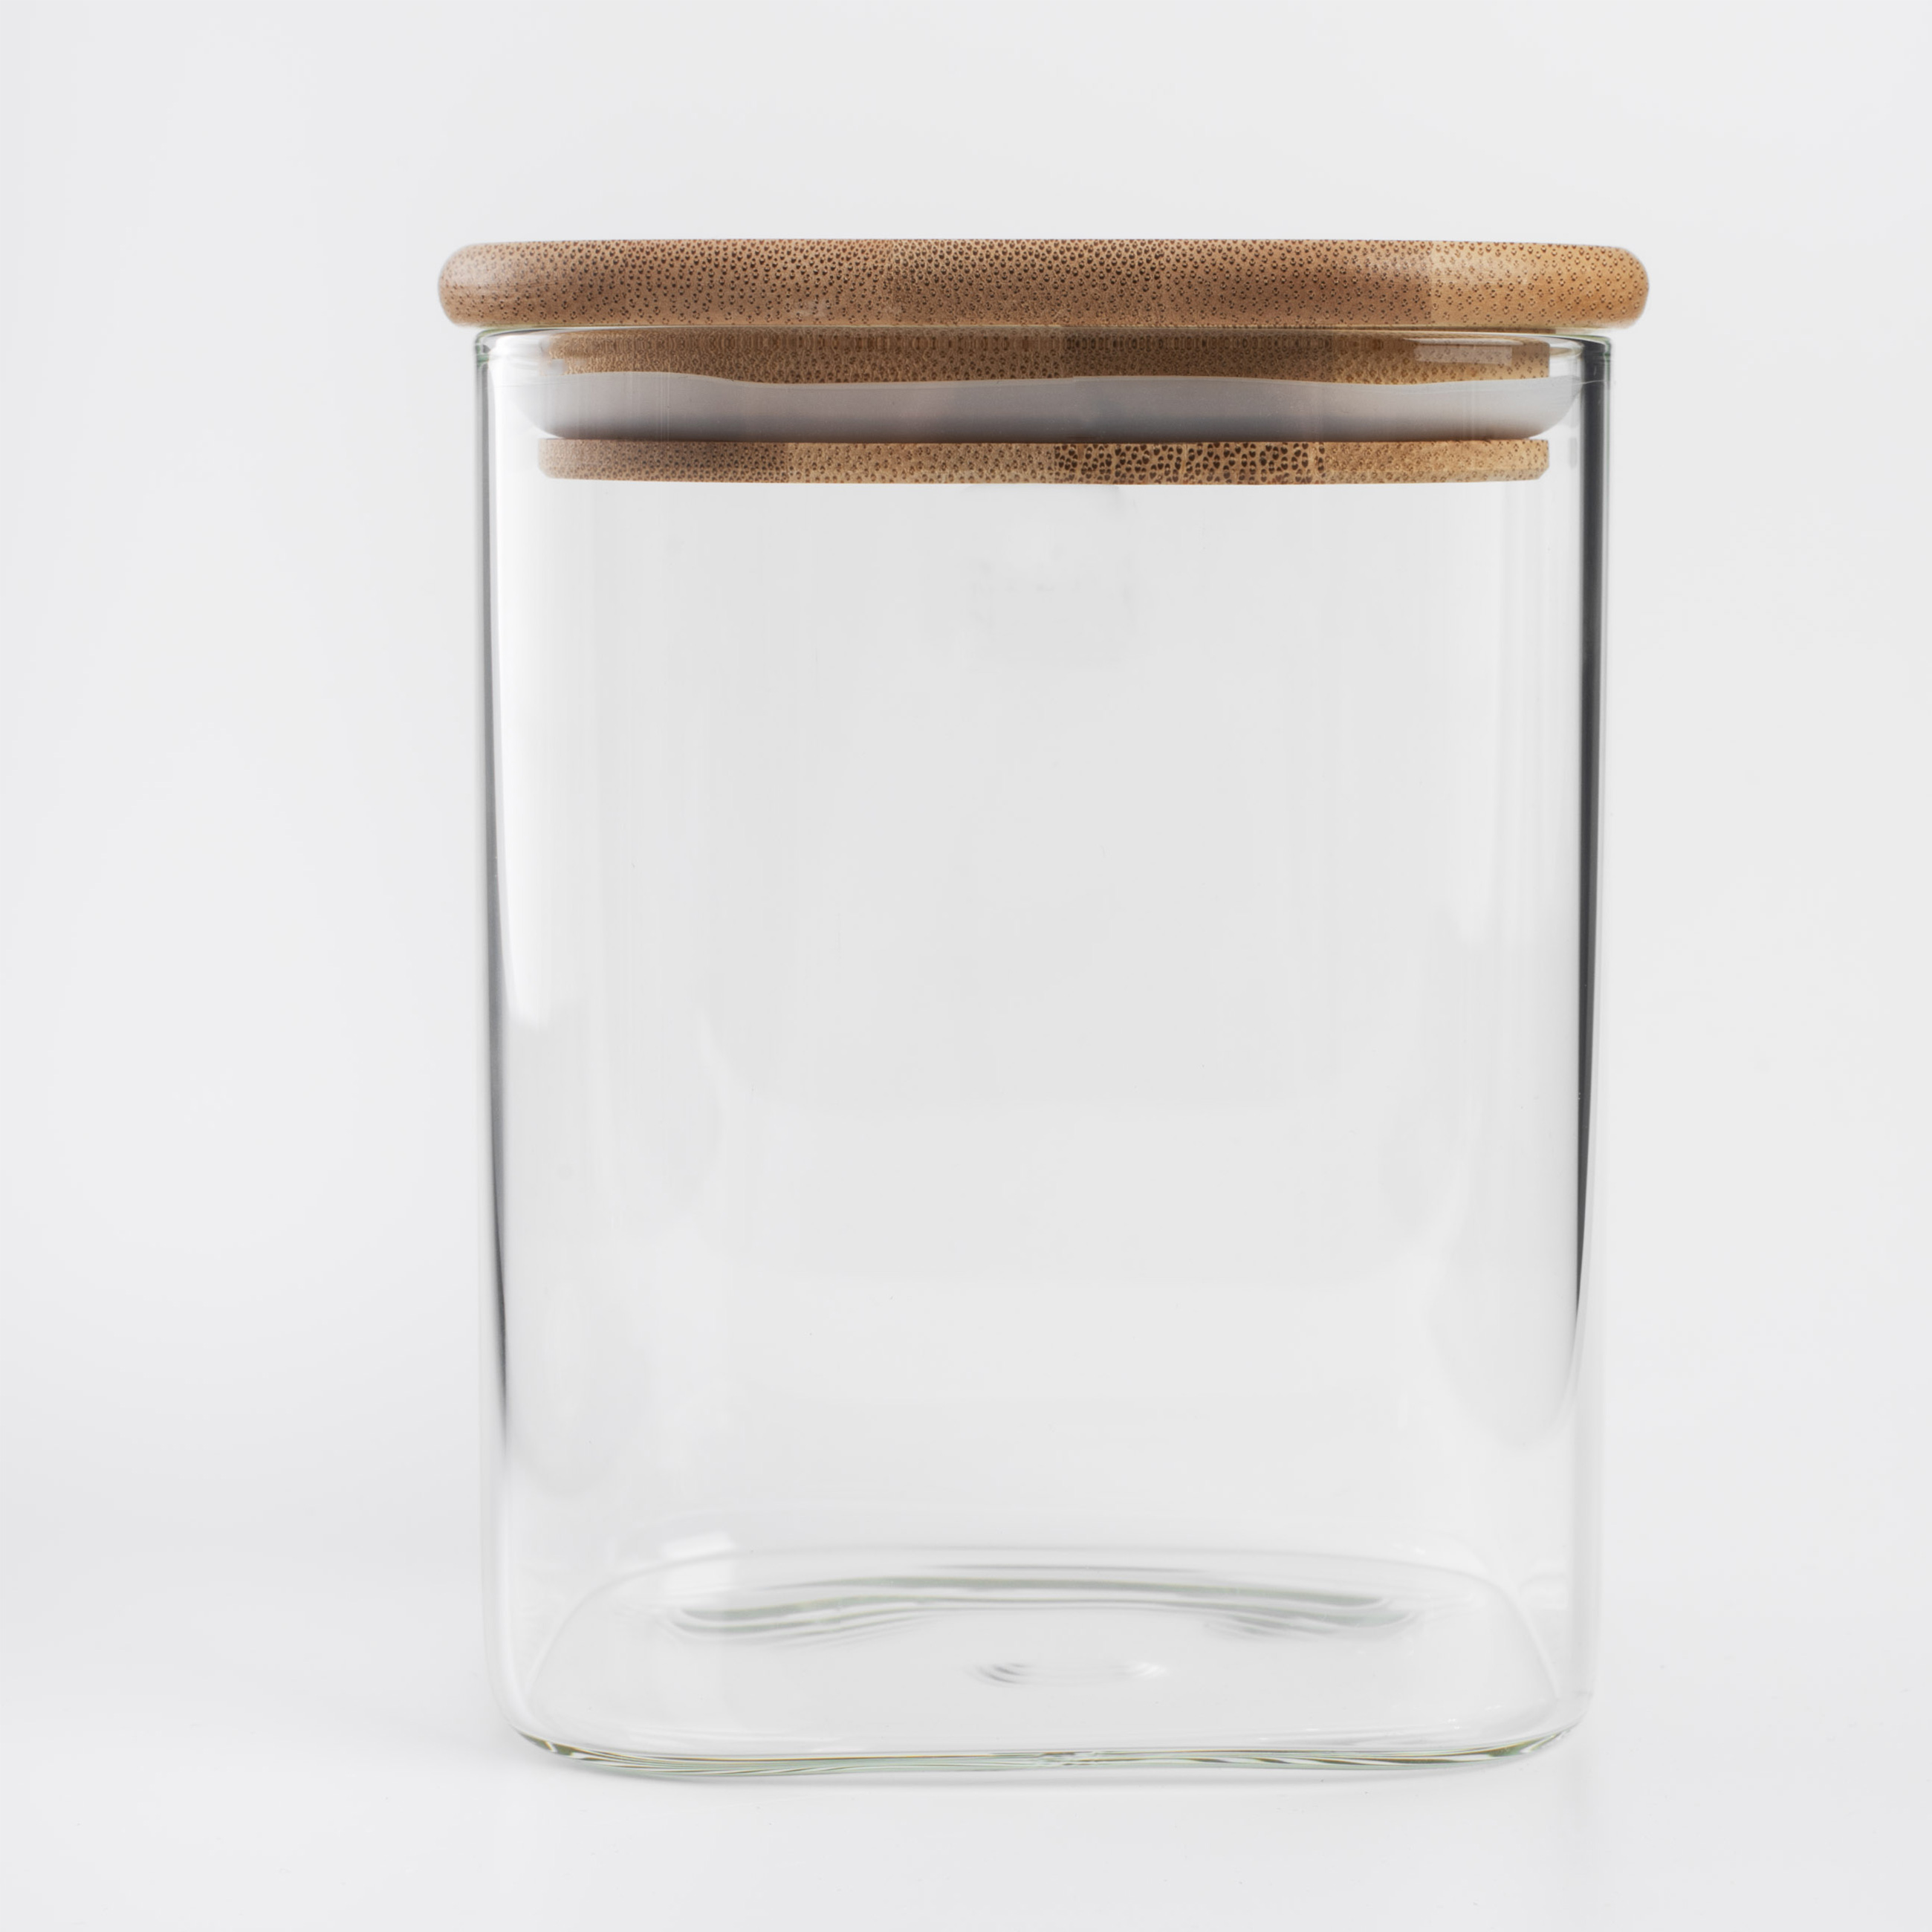 Jar for bulk products, 850 ml, glass / bamboo, square, Home made изображение № 2